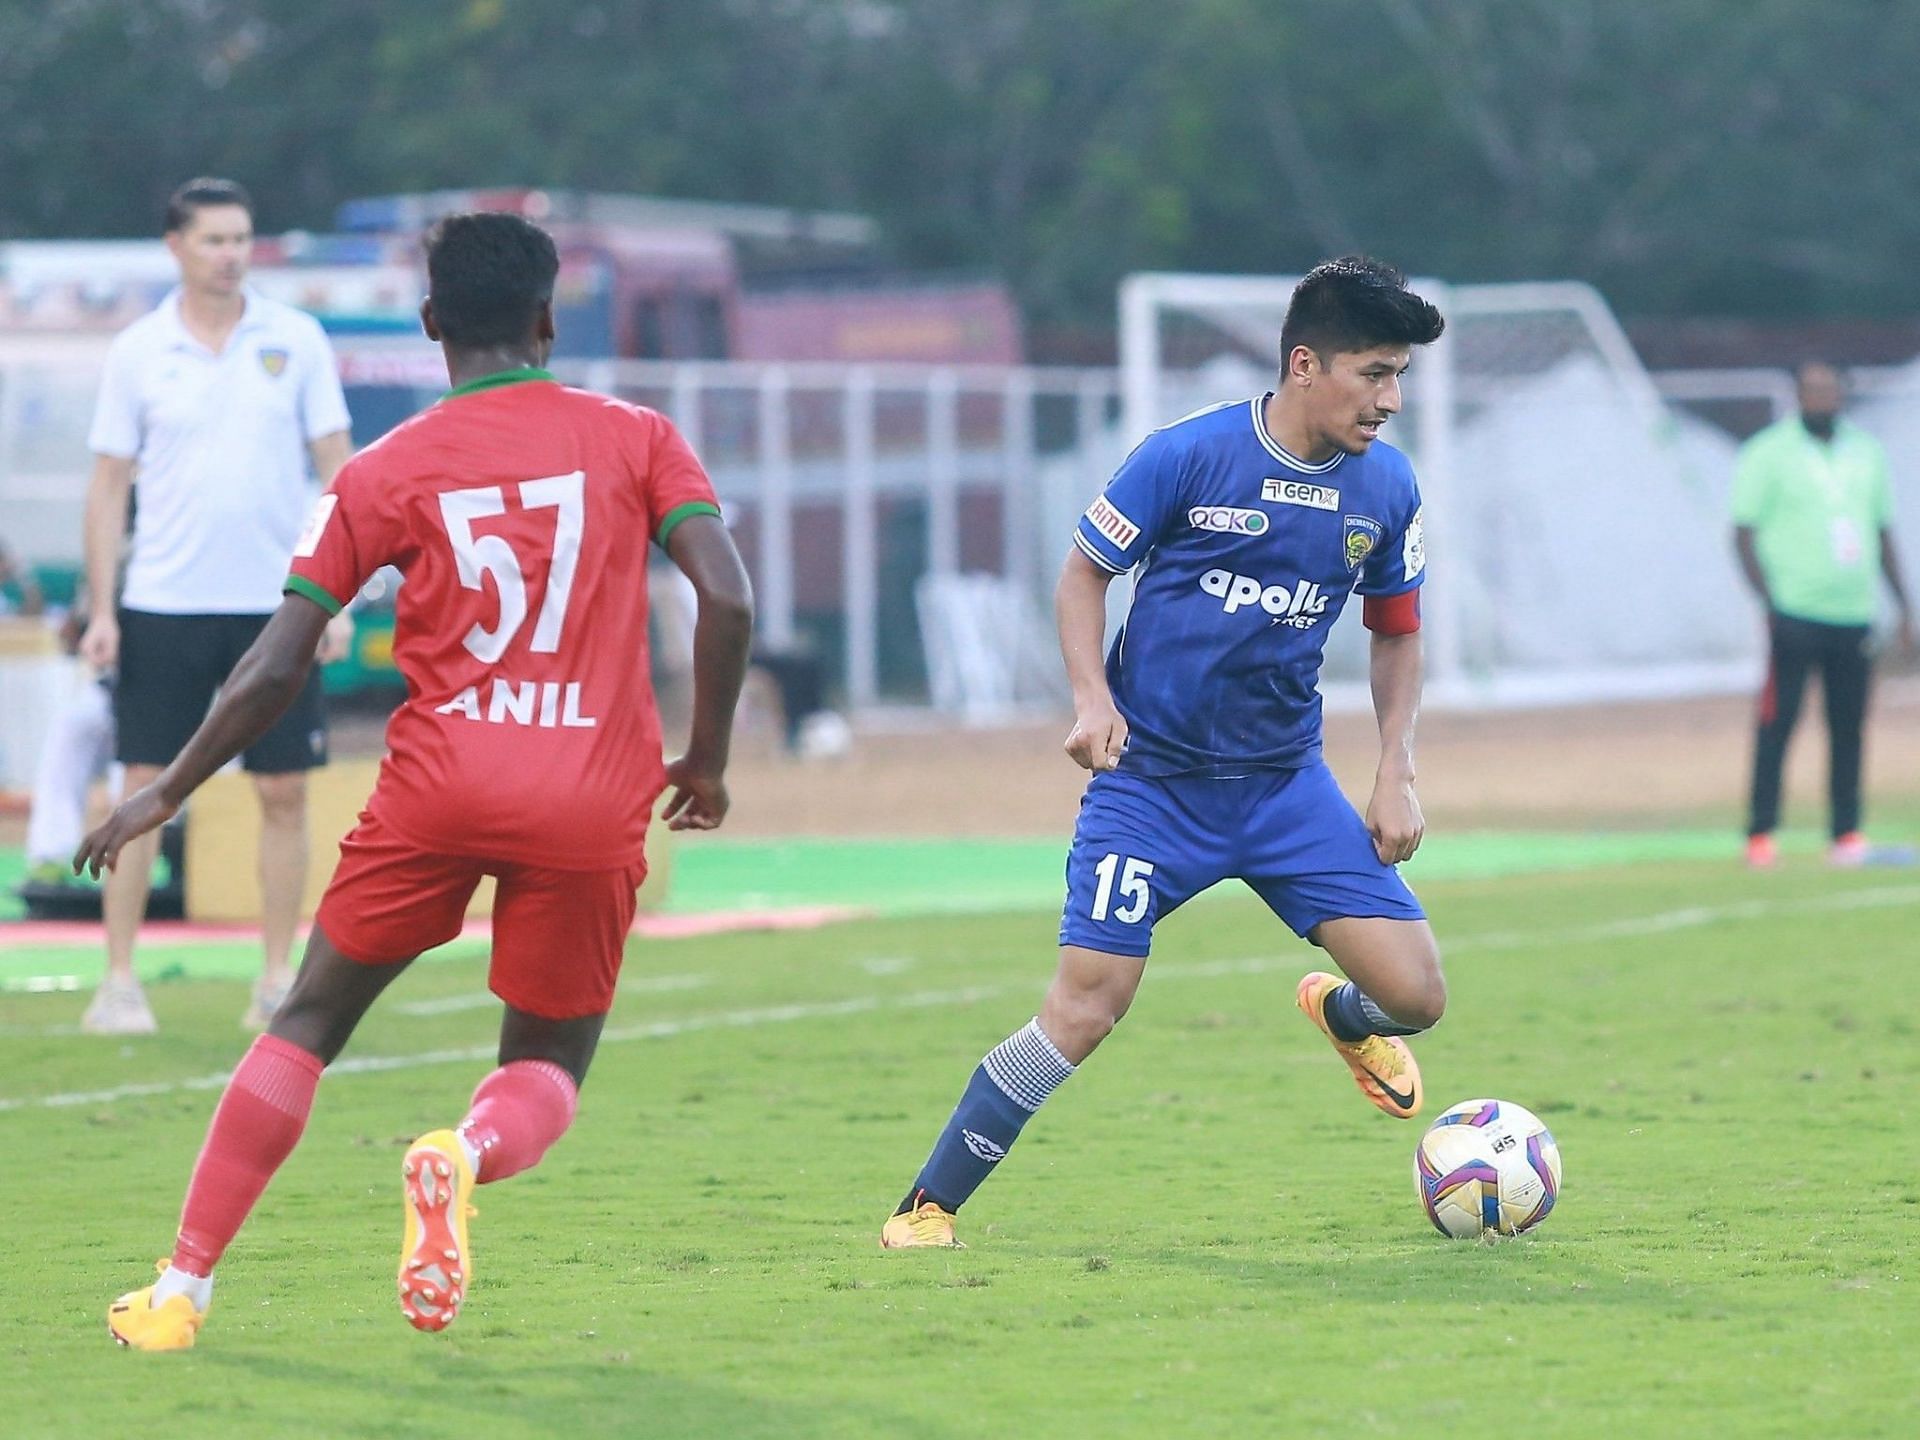 Chennaiyin FC and Churchill Brothers FC played out a draw in the Hero Super Cup. [Credits: Twitter]